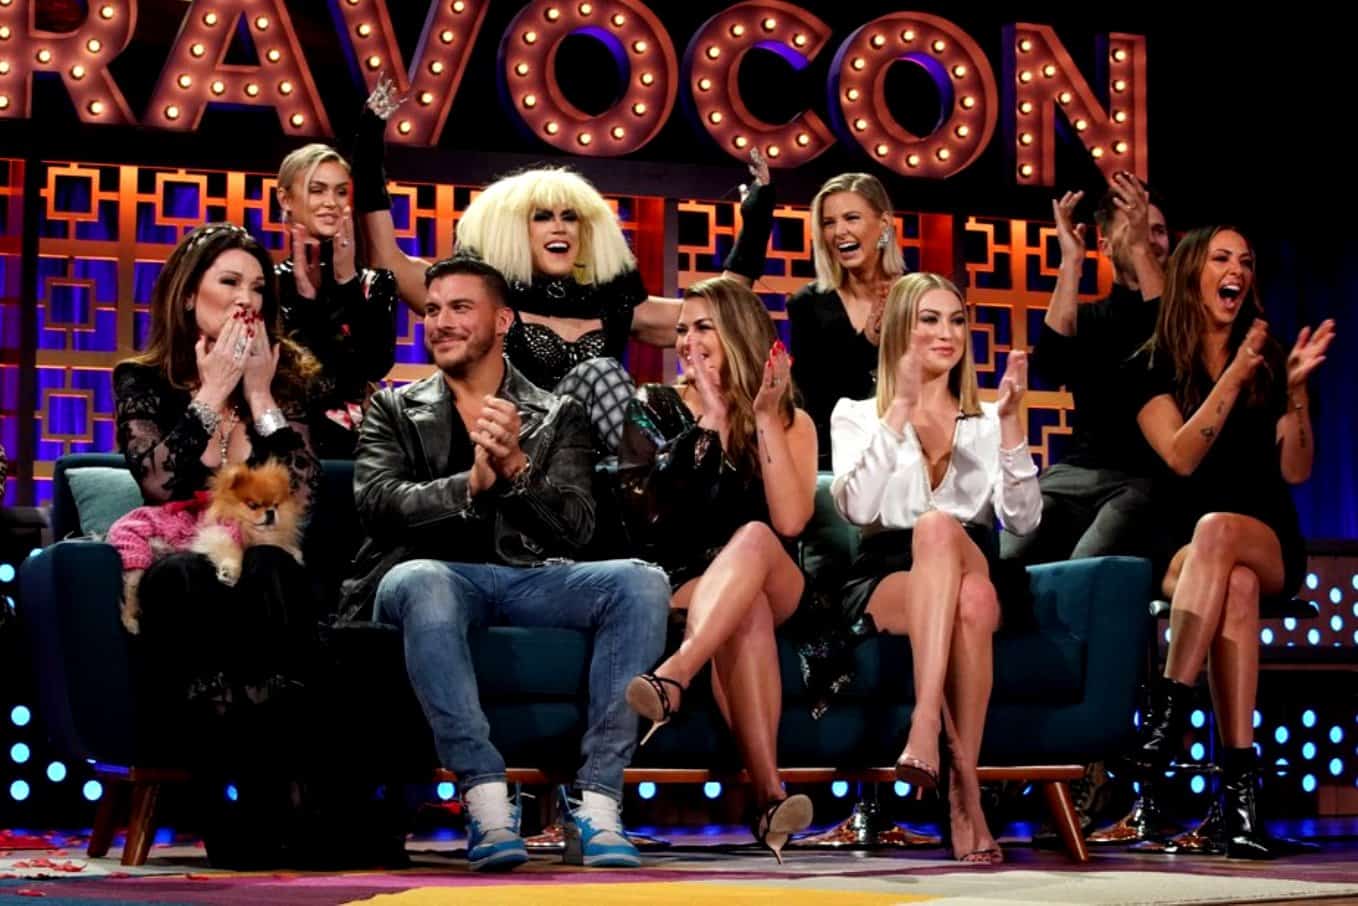 Vanderpump Rules Season 8 Spoilers Revealed: Find Out Ariana and Lisa's Status After Feud Plus What to Expect From Each Cast Member